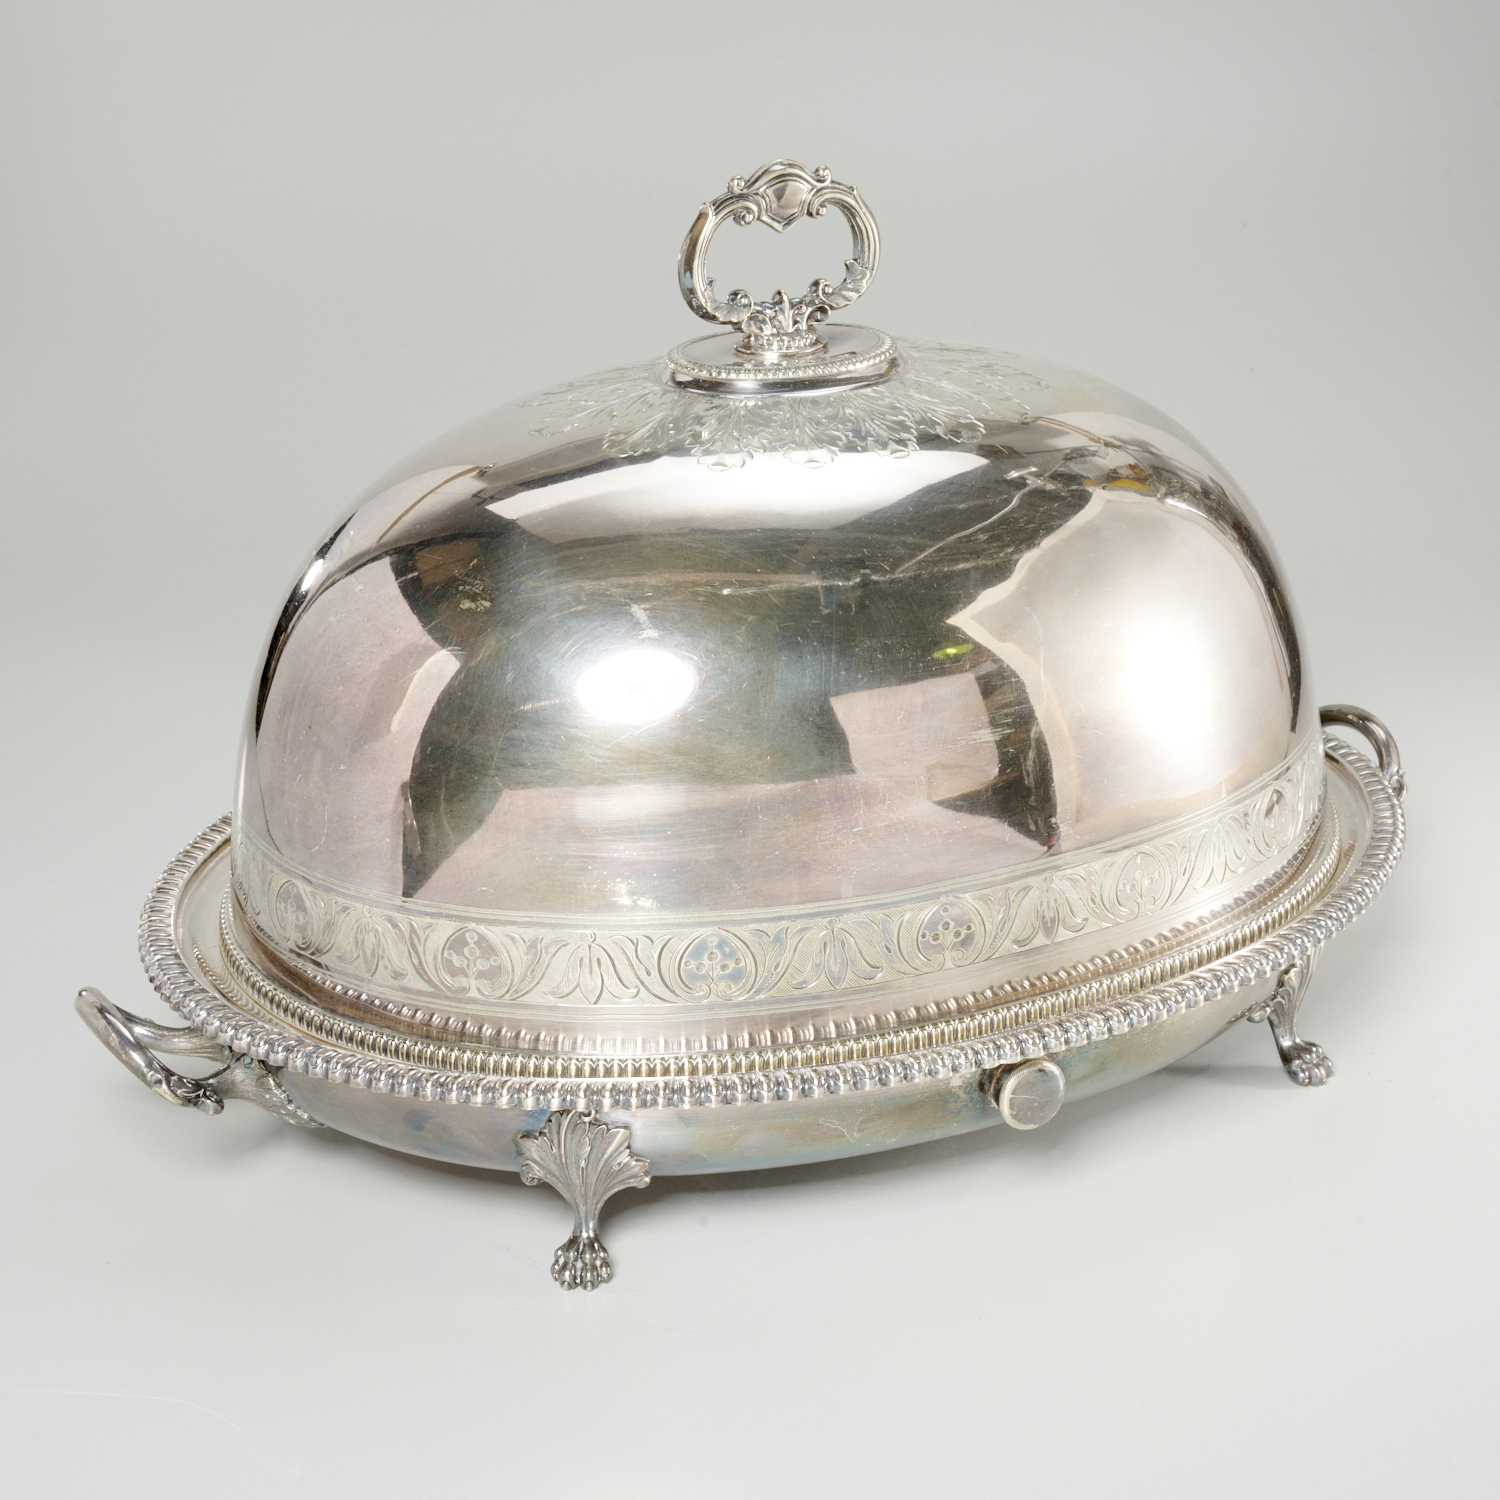 LARGE SHEFFIELD PLATED MEAT DOME 361367